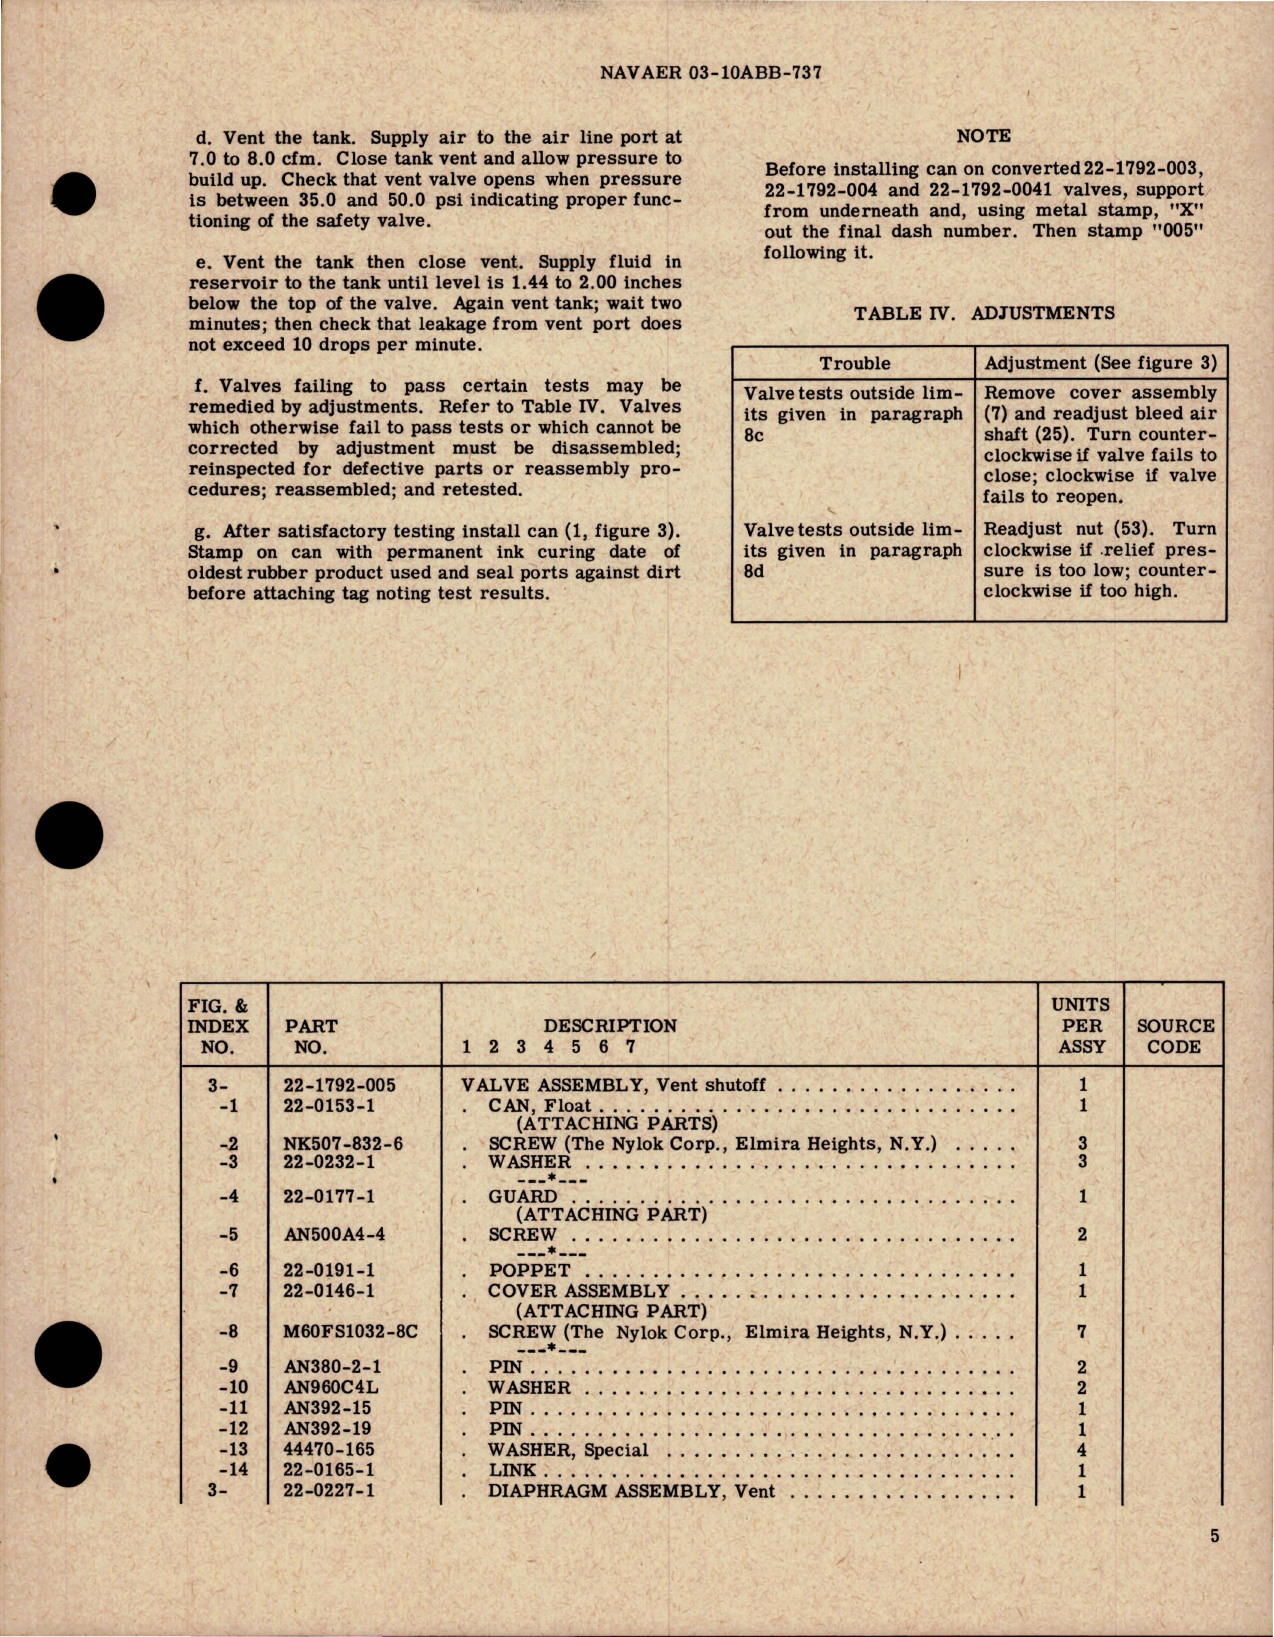 Sample page 5 from AirCorps Library document: Overhaul Instructions with Parts for Vent Shutoff Valve - 22-1792-003, 22-1792-004, 22-1792-0041 and 22-1792-005